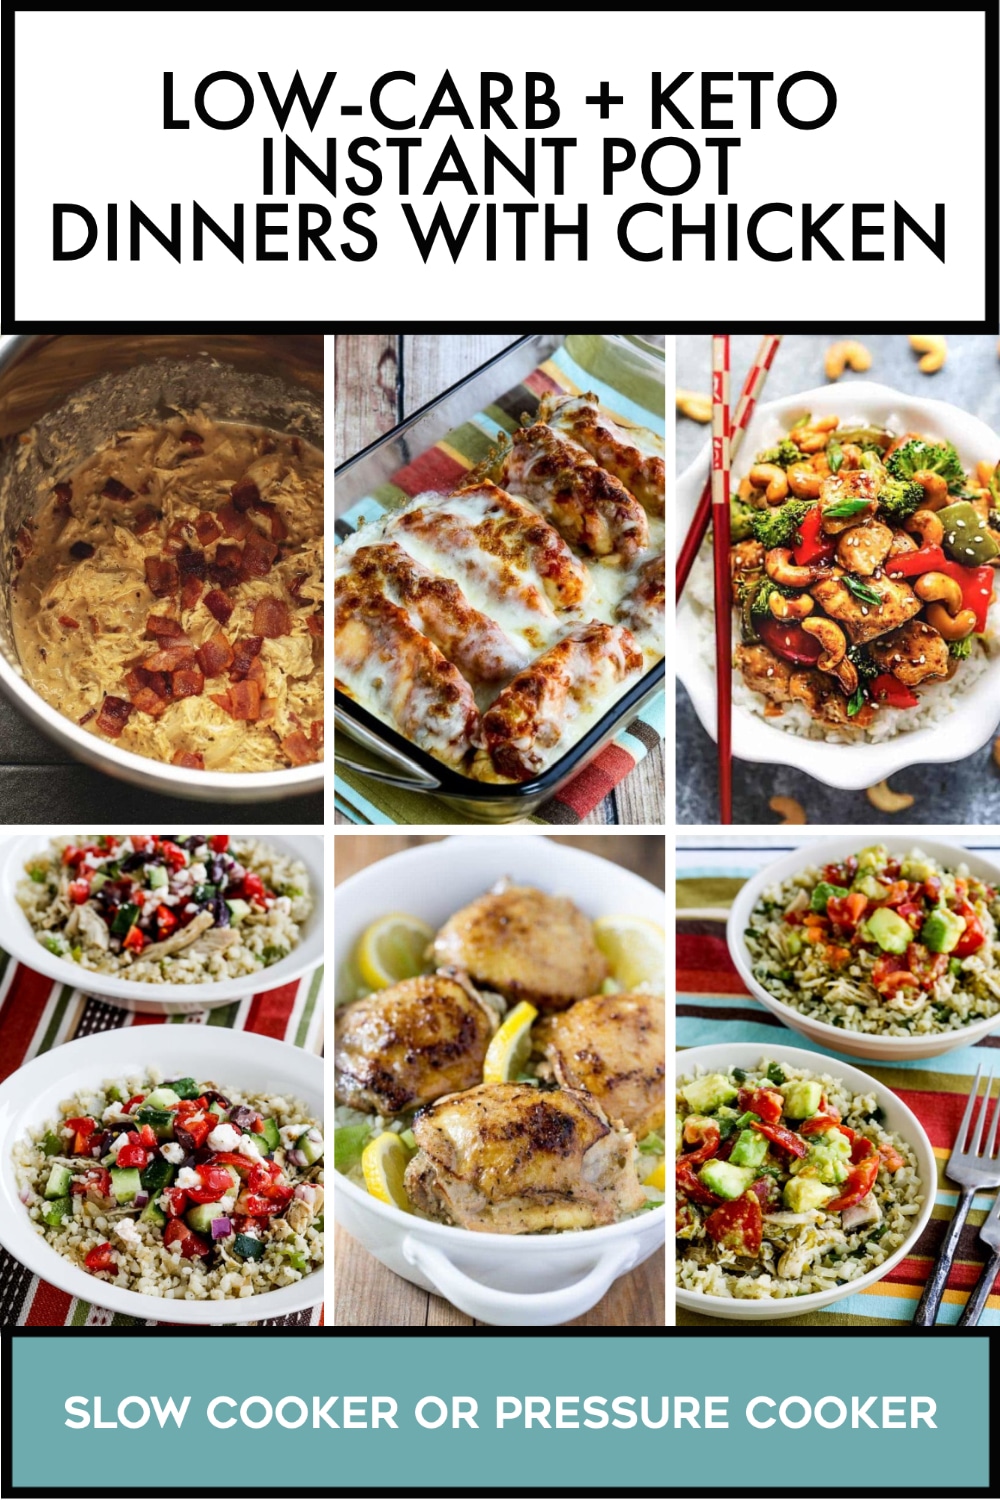 Pinterest image of Low-Carb and Keto Instant Pot Dinners with Chicken